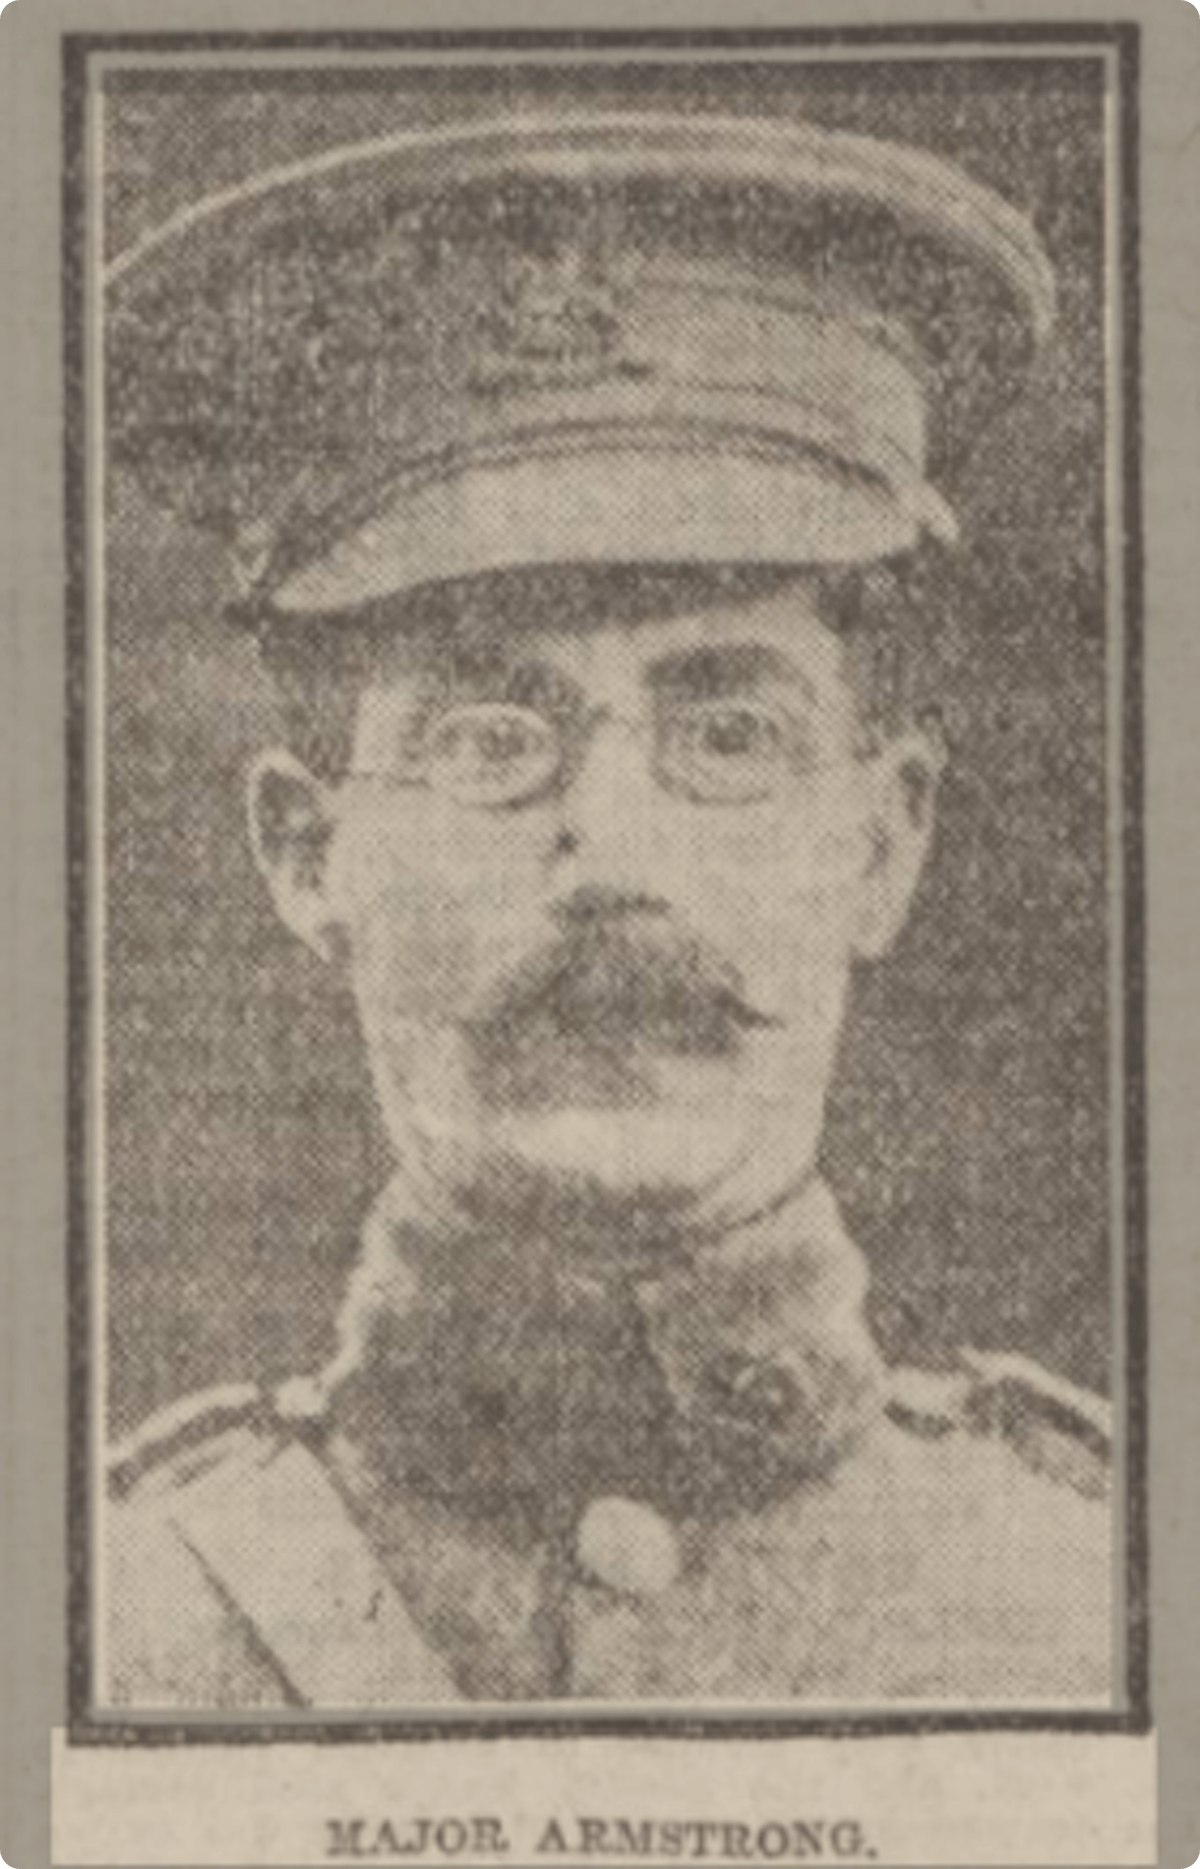 Major Armstrong, pictured in the Dundee Courier, 14 April 1922